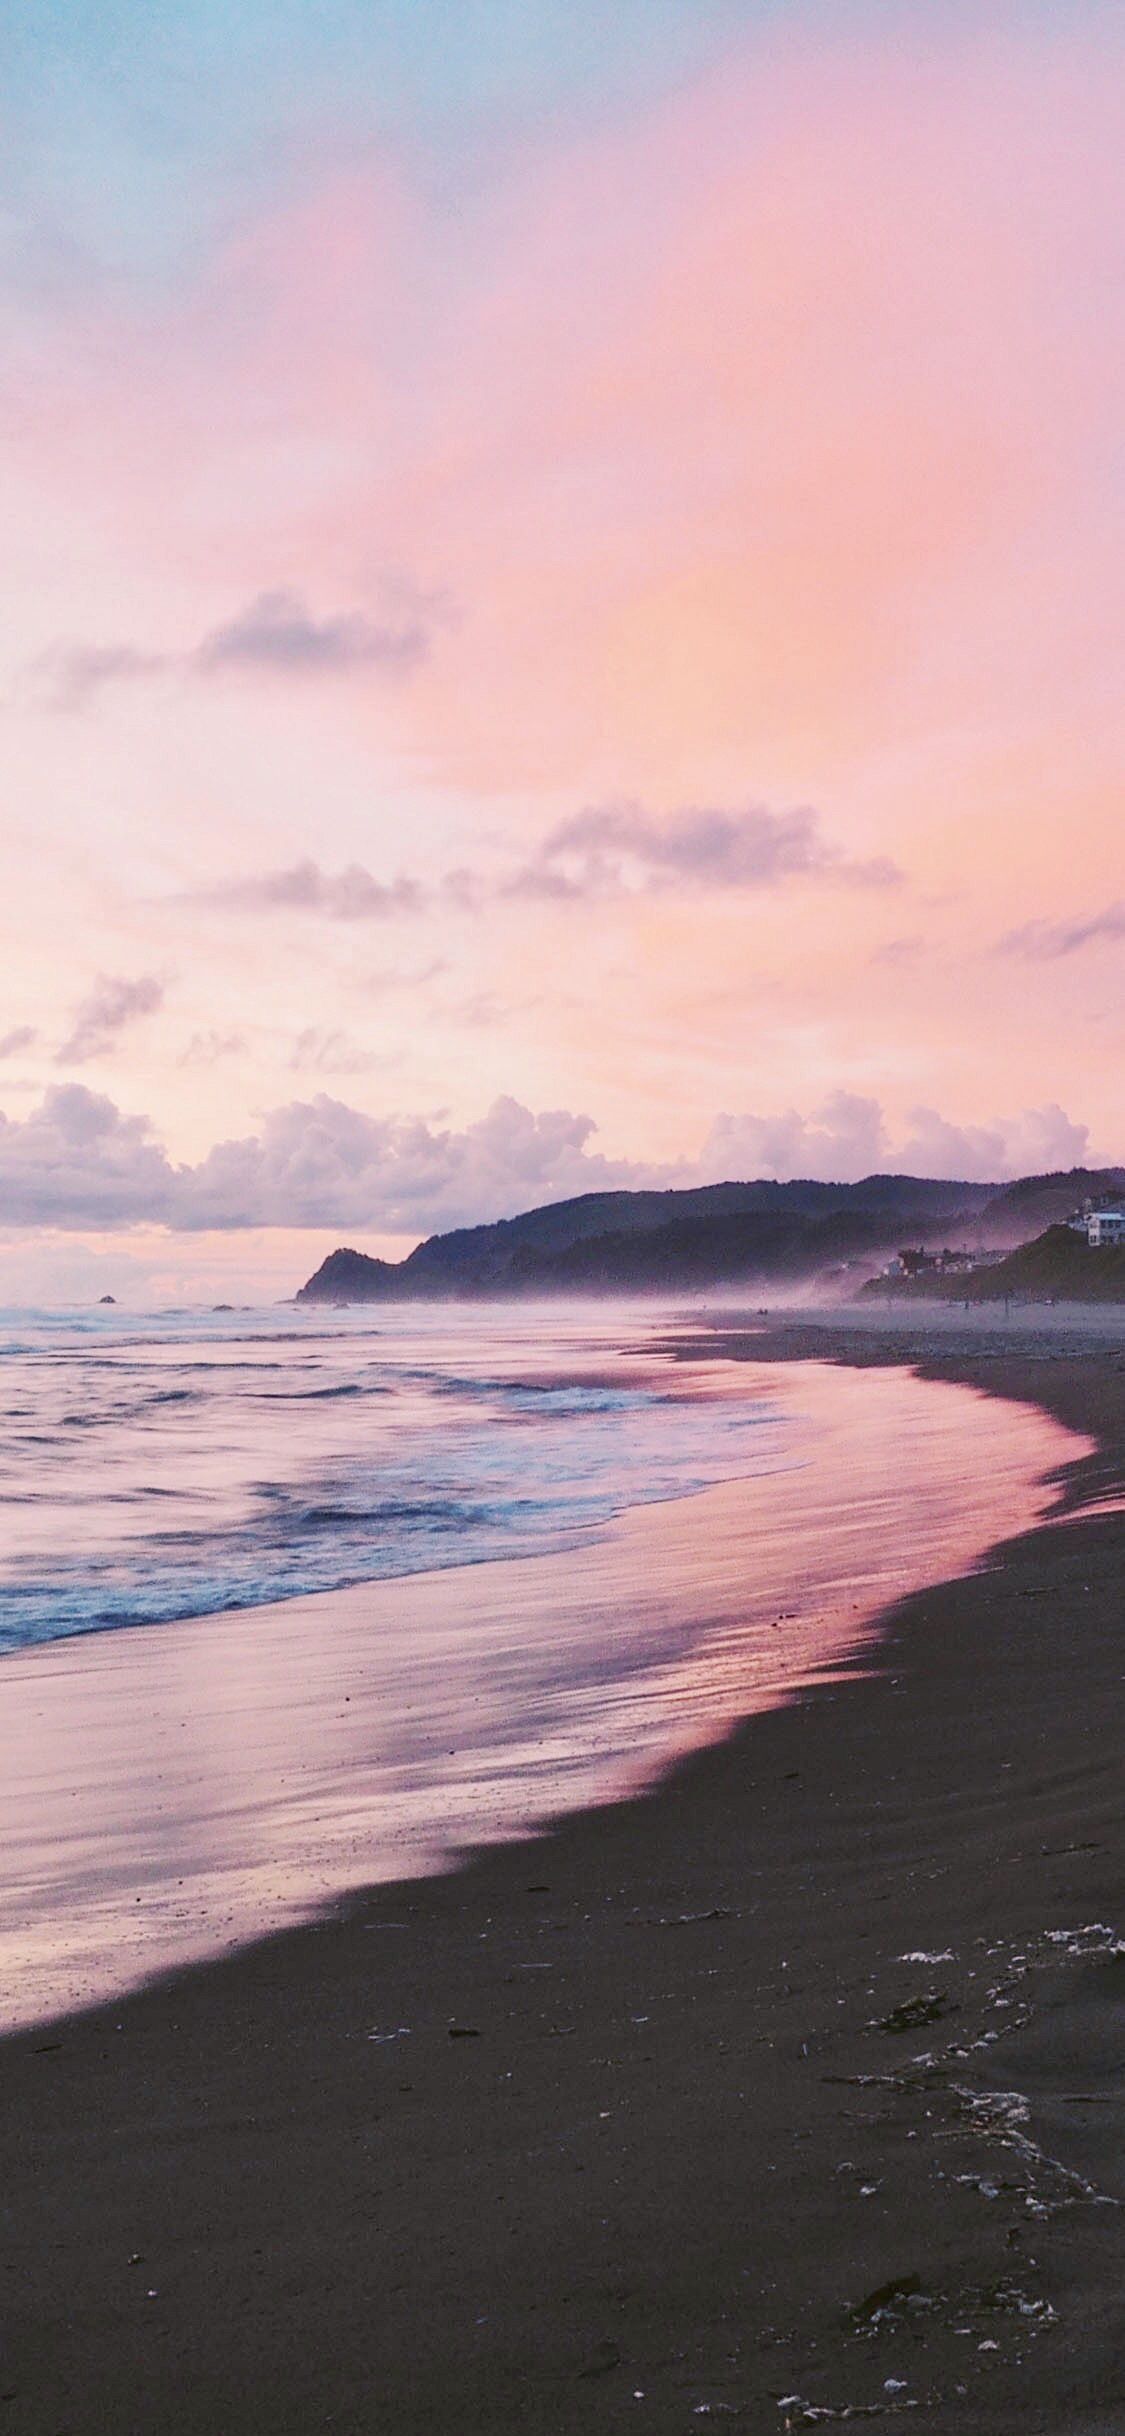 A beach with a pink and blue sunset. - Beach